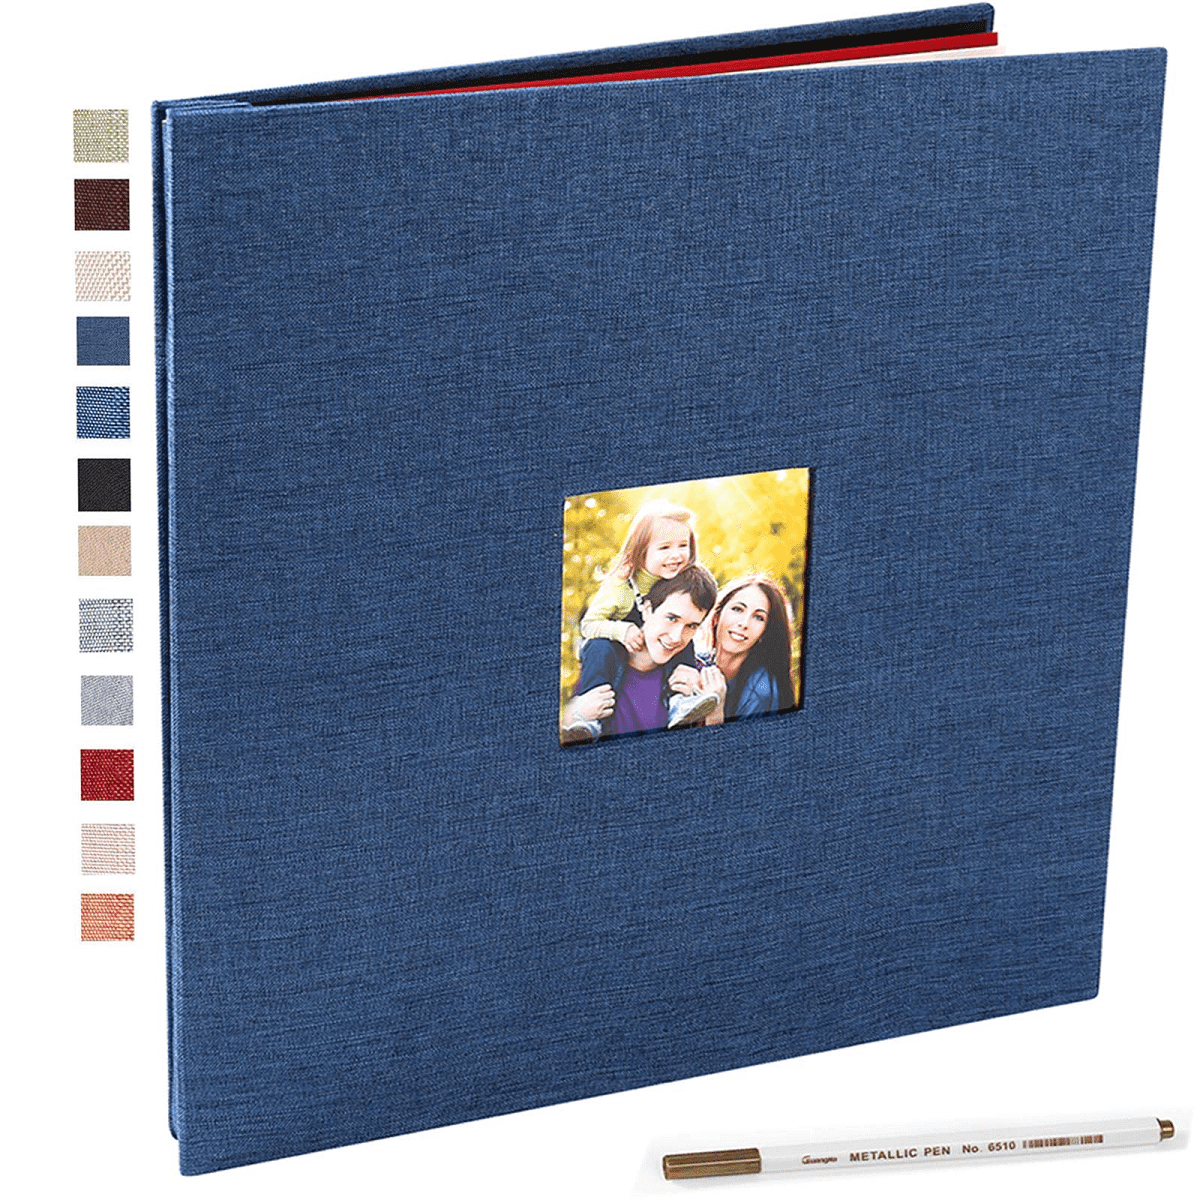 Spbapr Large Photo Album Self Adhesive 60 Pages Linen cover DIY Magnetic  Scrapbook album with A Metal Pen Hold 3x5 4x6 5